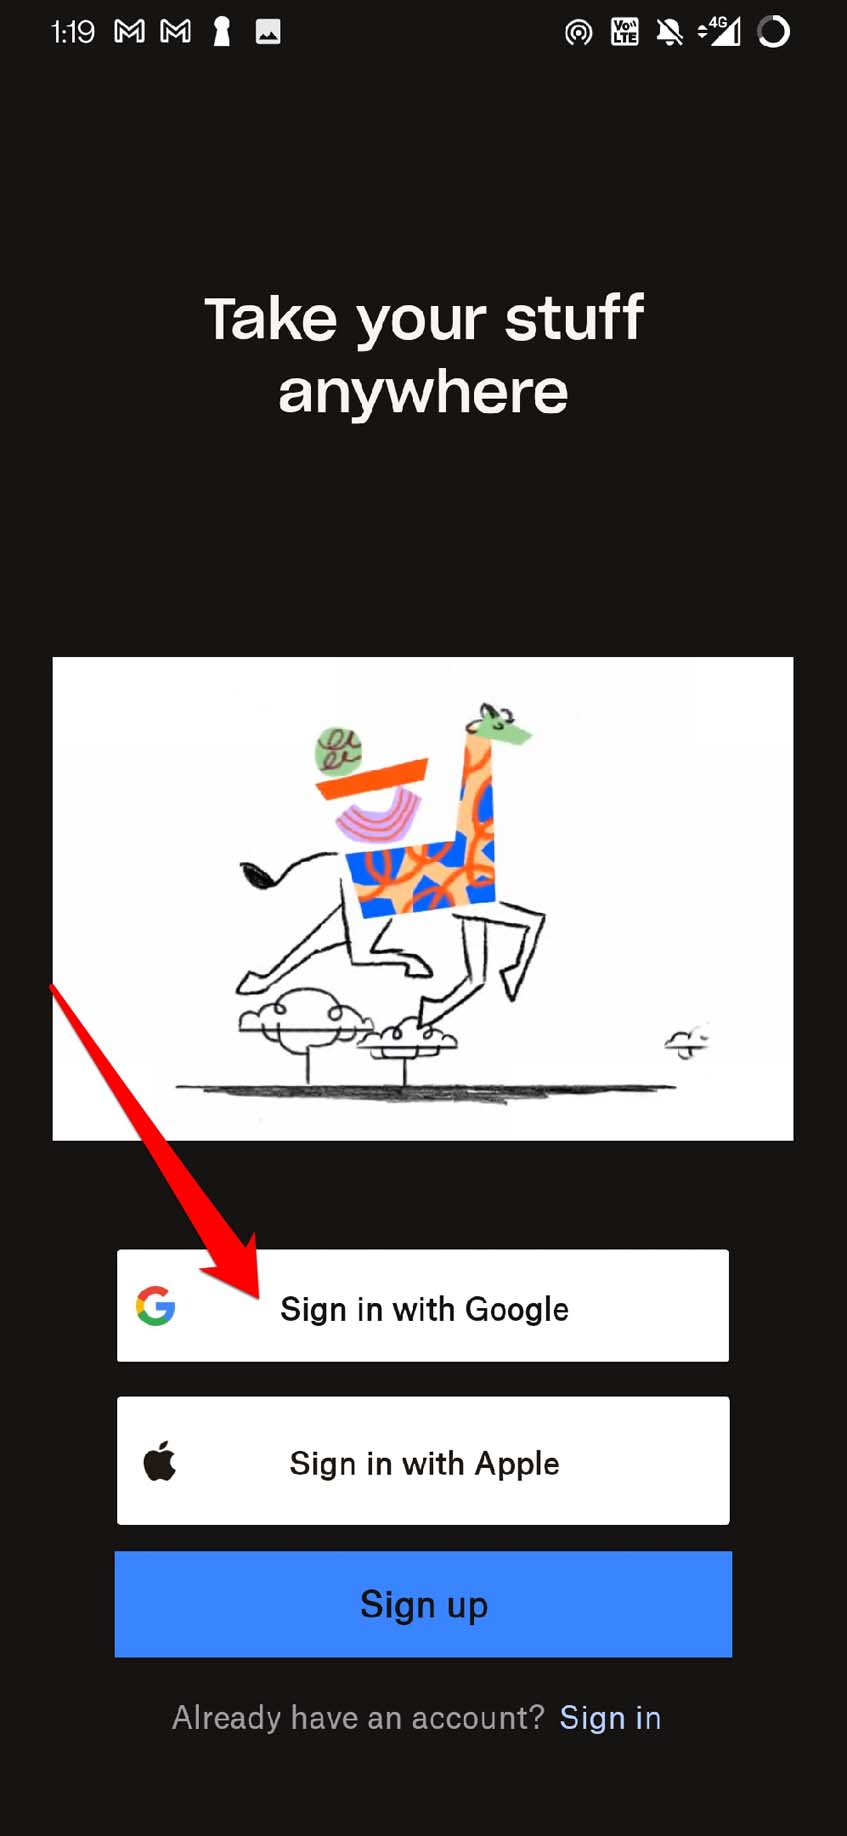 Sign in with GMail